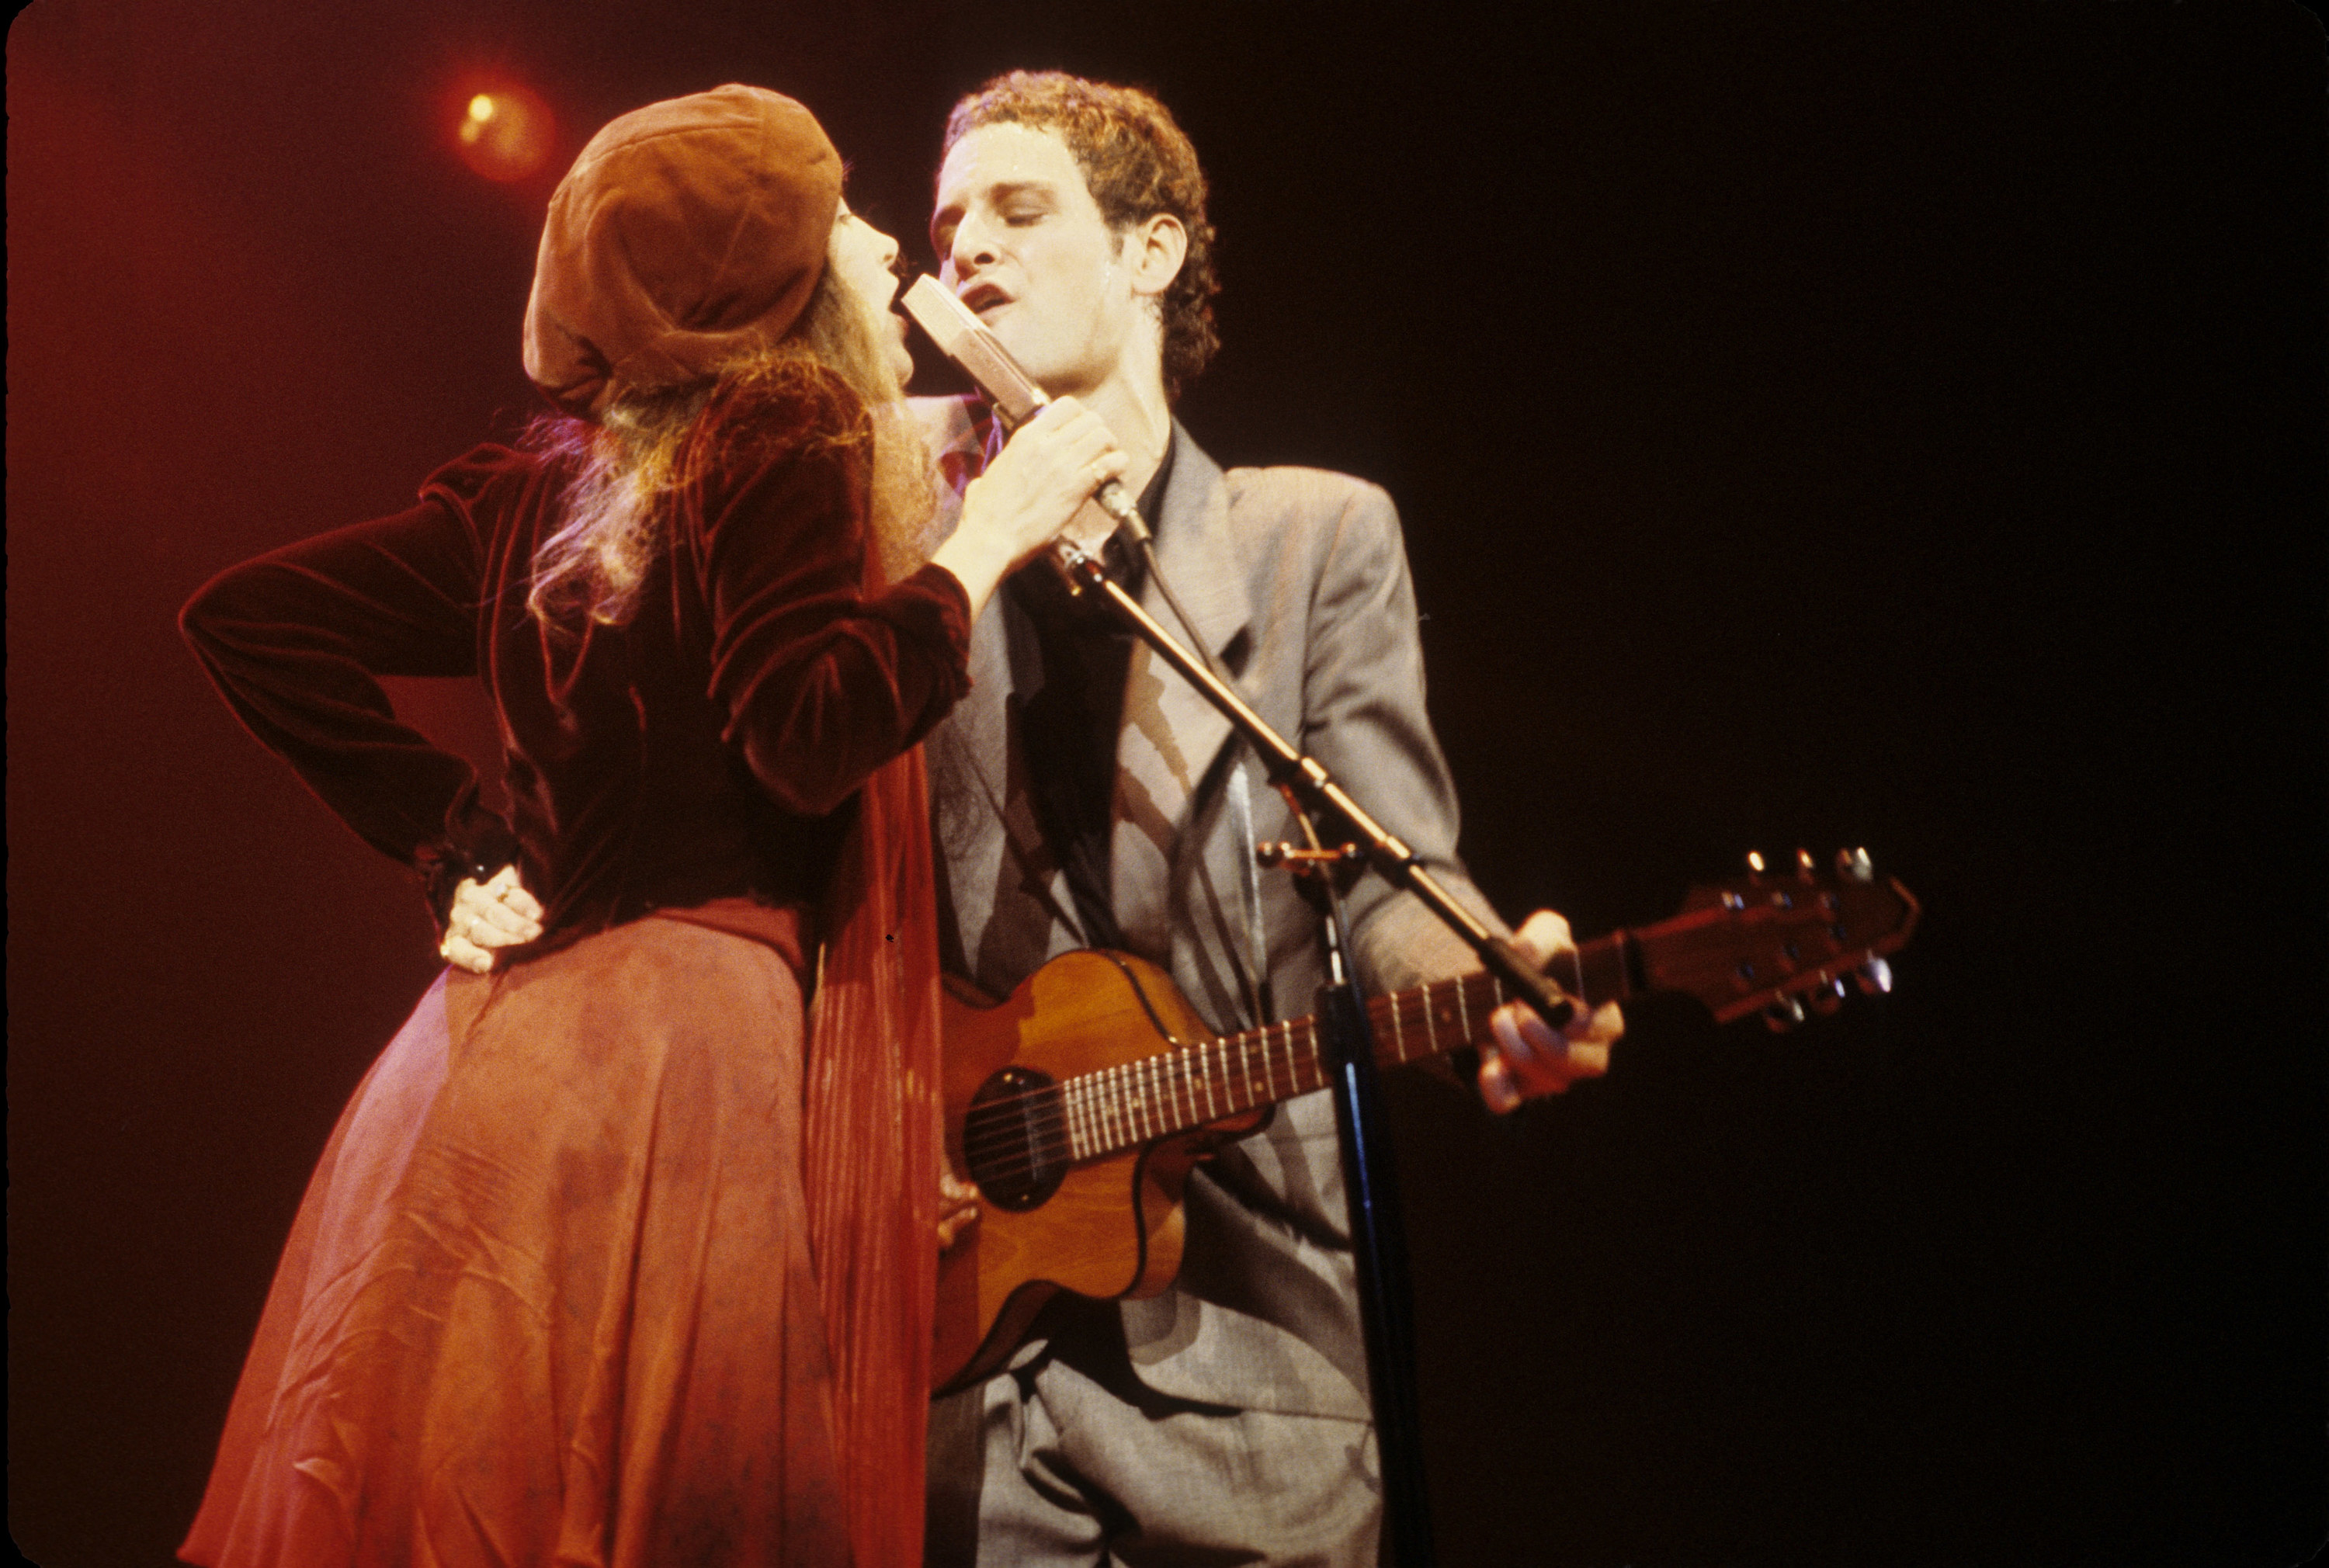 Stevie Nicks and Lindsey Buckingham on stage, singing passionately into the same mic with their faces close together